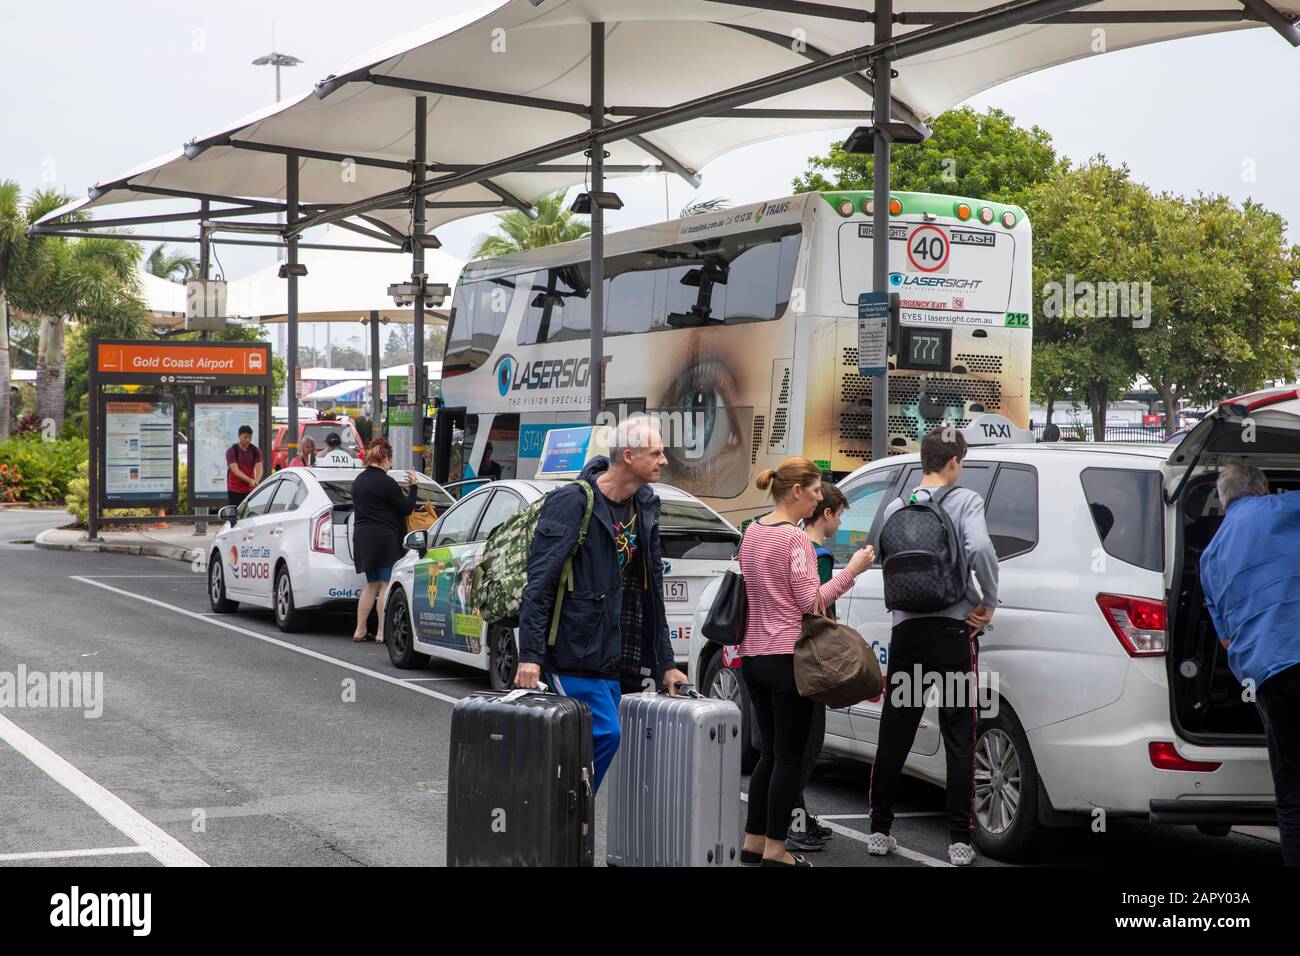 Coolangatta gold coast airport in Queensland, Holidaymakers travelling with suitcases meet a taxi at the airport,Australia Stock Photo